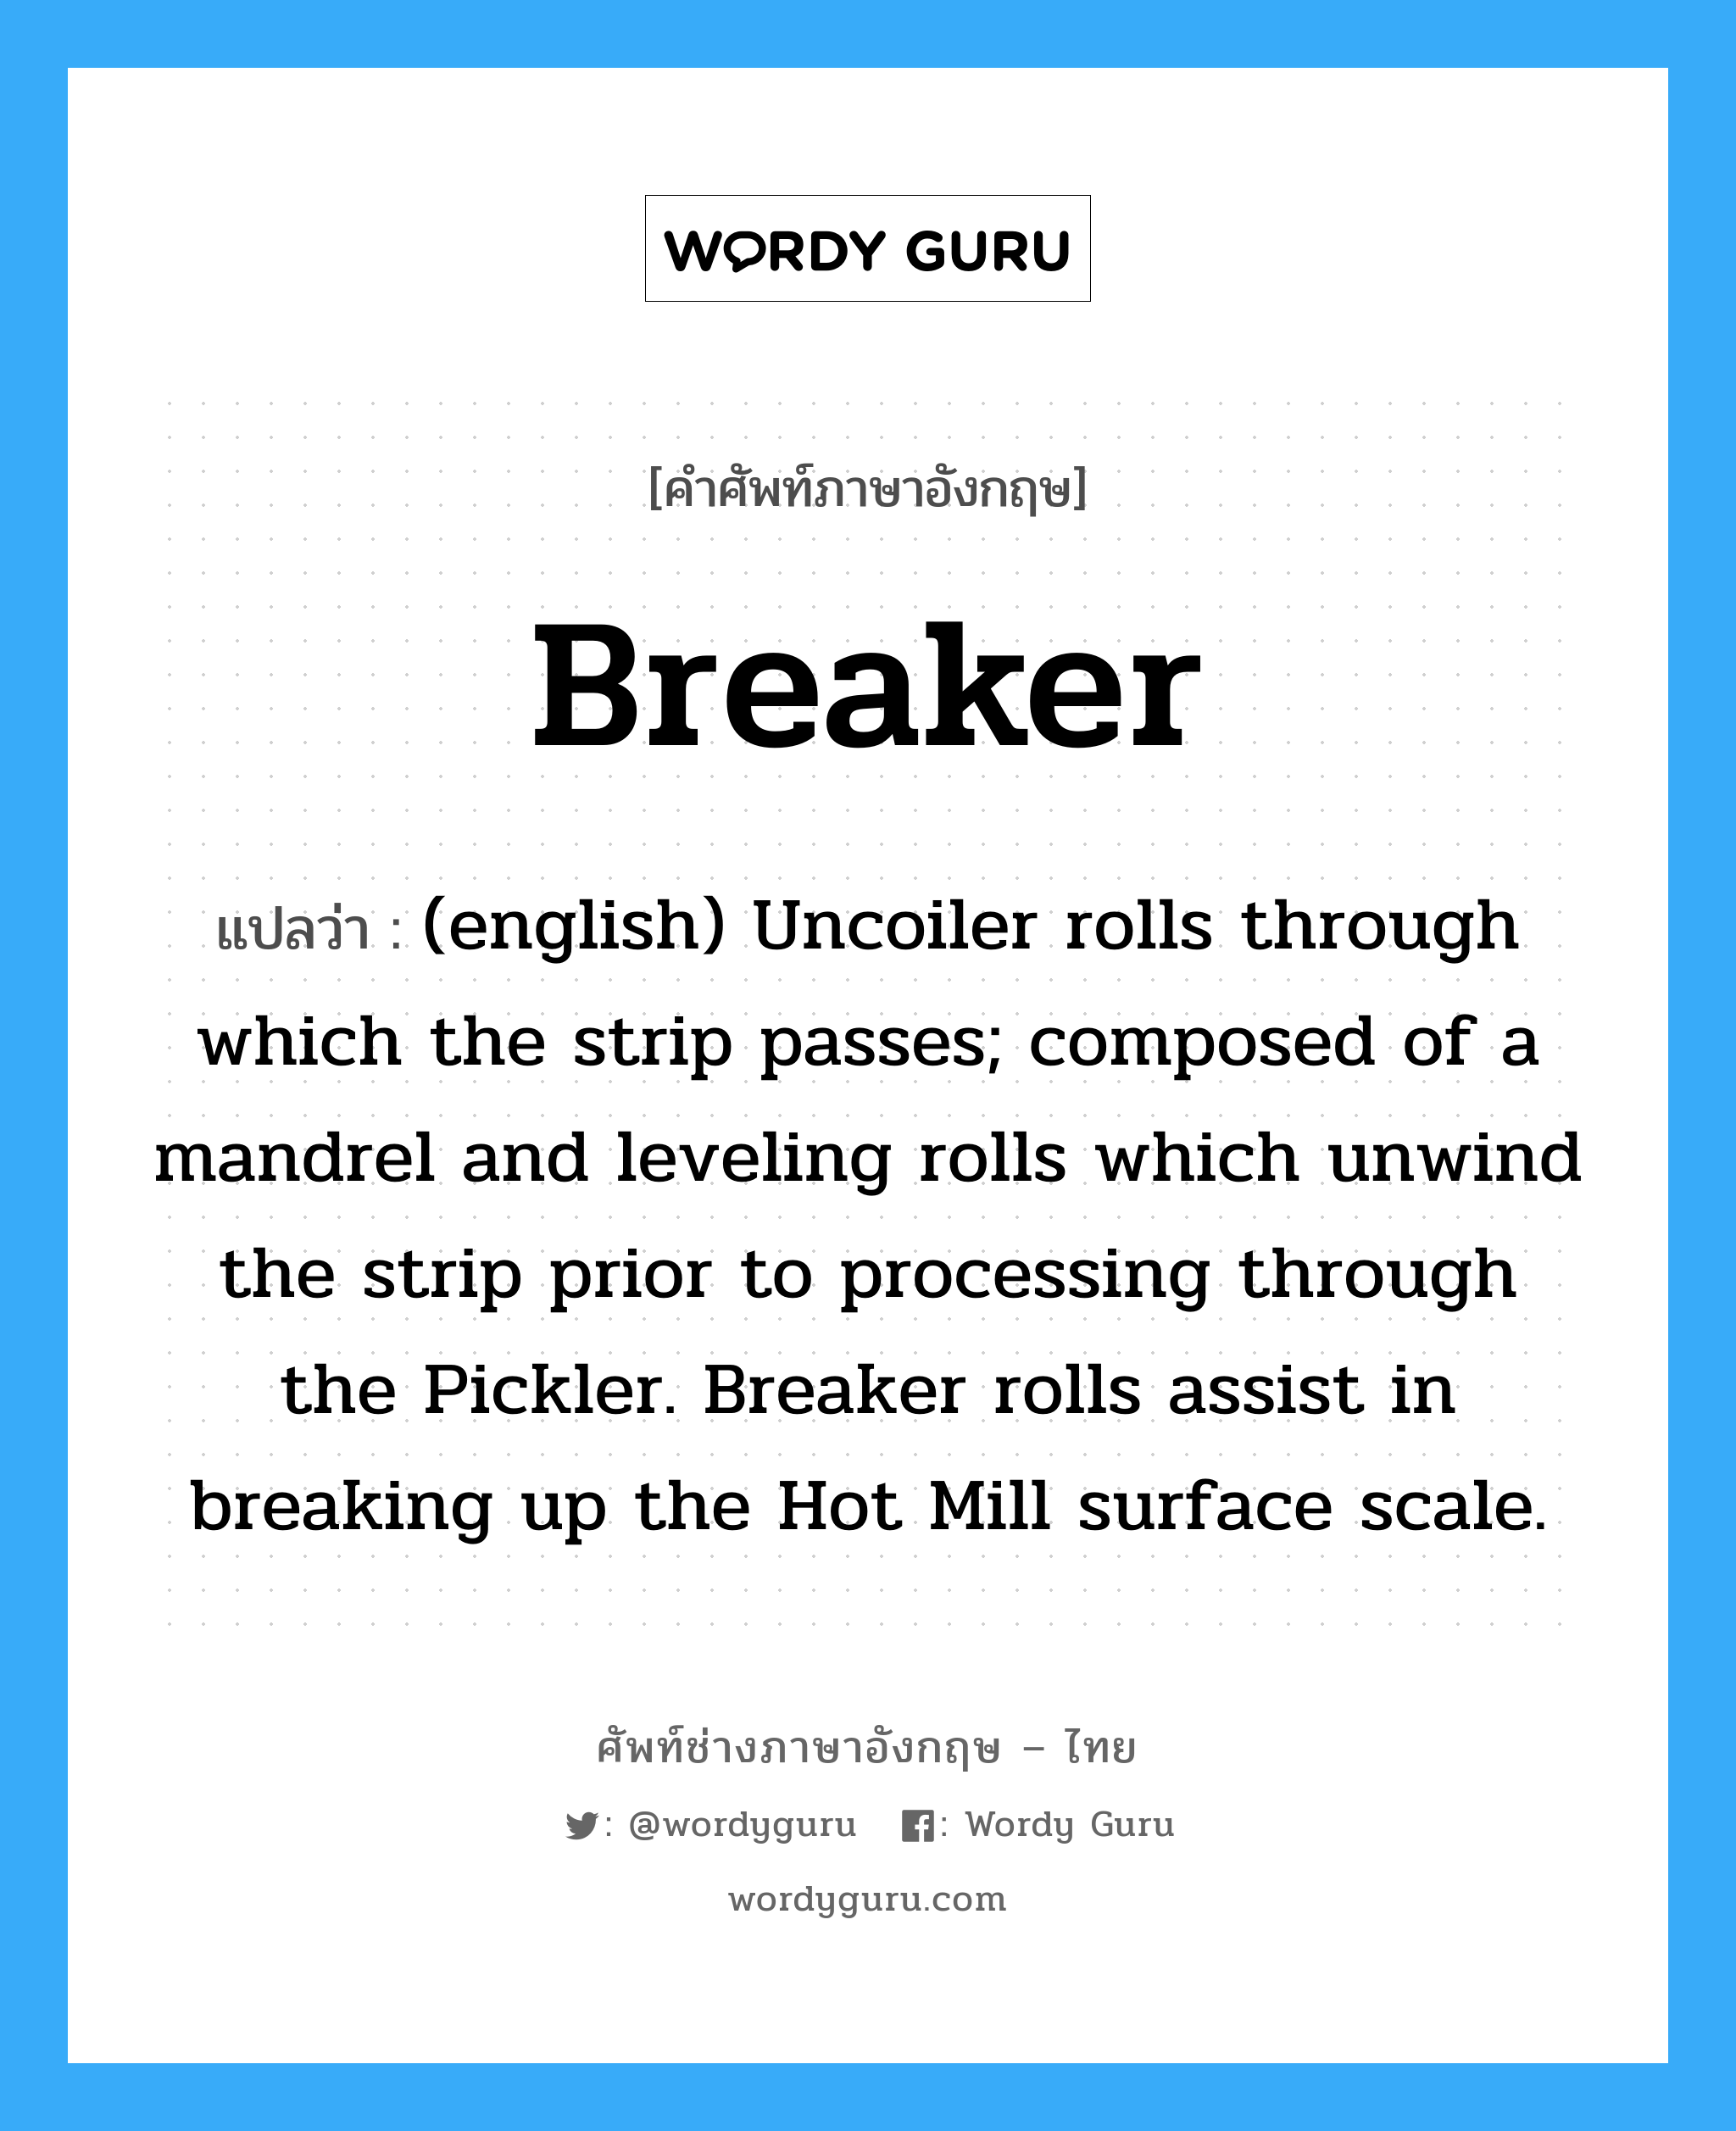 Breaker แปลว่า?, คำศัพท์ช่างภาษาอังกฤษ - ไทย Breaker คำศัพท์ภาษาอังกฤษ Breaker แปลว่า (english) Uncoiler rolls through which the strip passes; composed of a mandrel and leveling rolls which unwind the strip prior to processing through the Pickler. Breaker rolls assist in breaking up the Hot Mill surface scale.